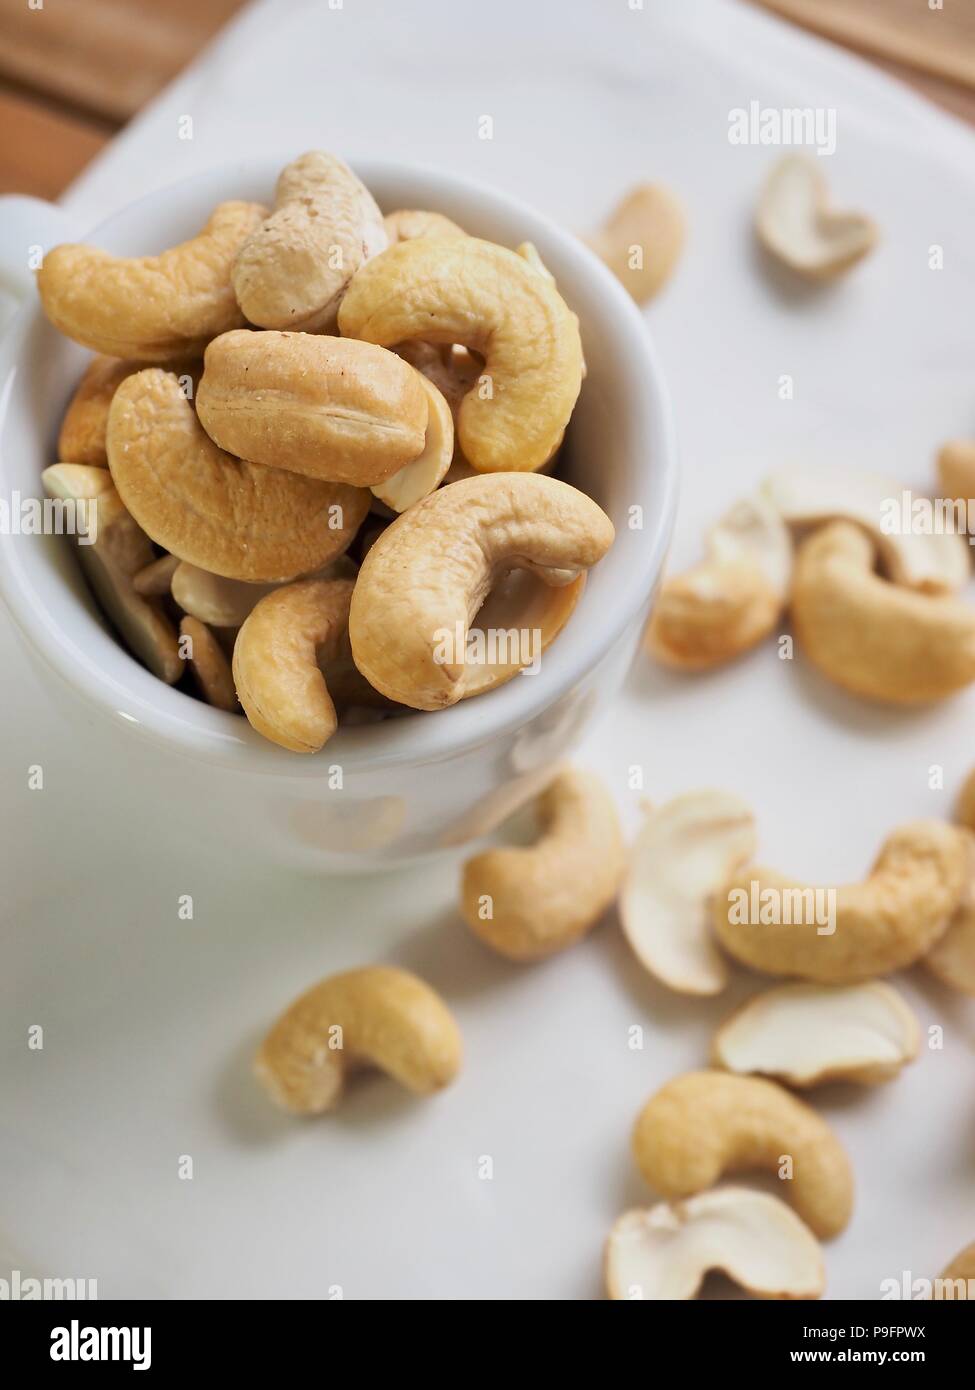 Cashew nuts in a coffee cup Stock Photo